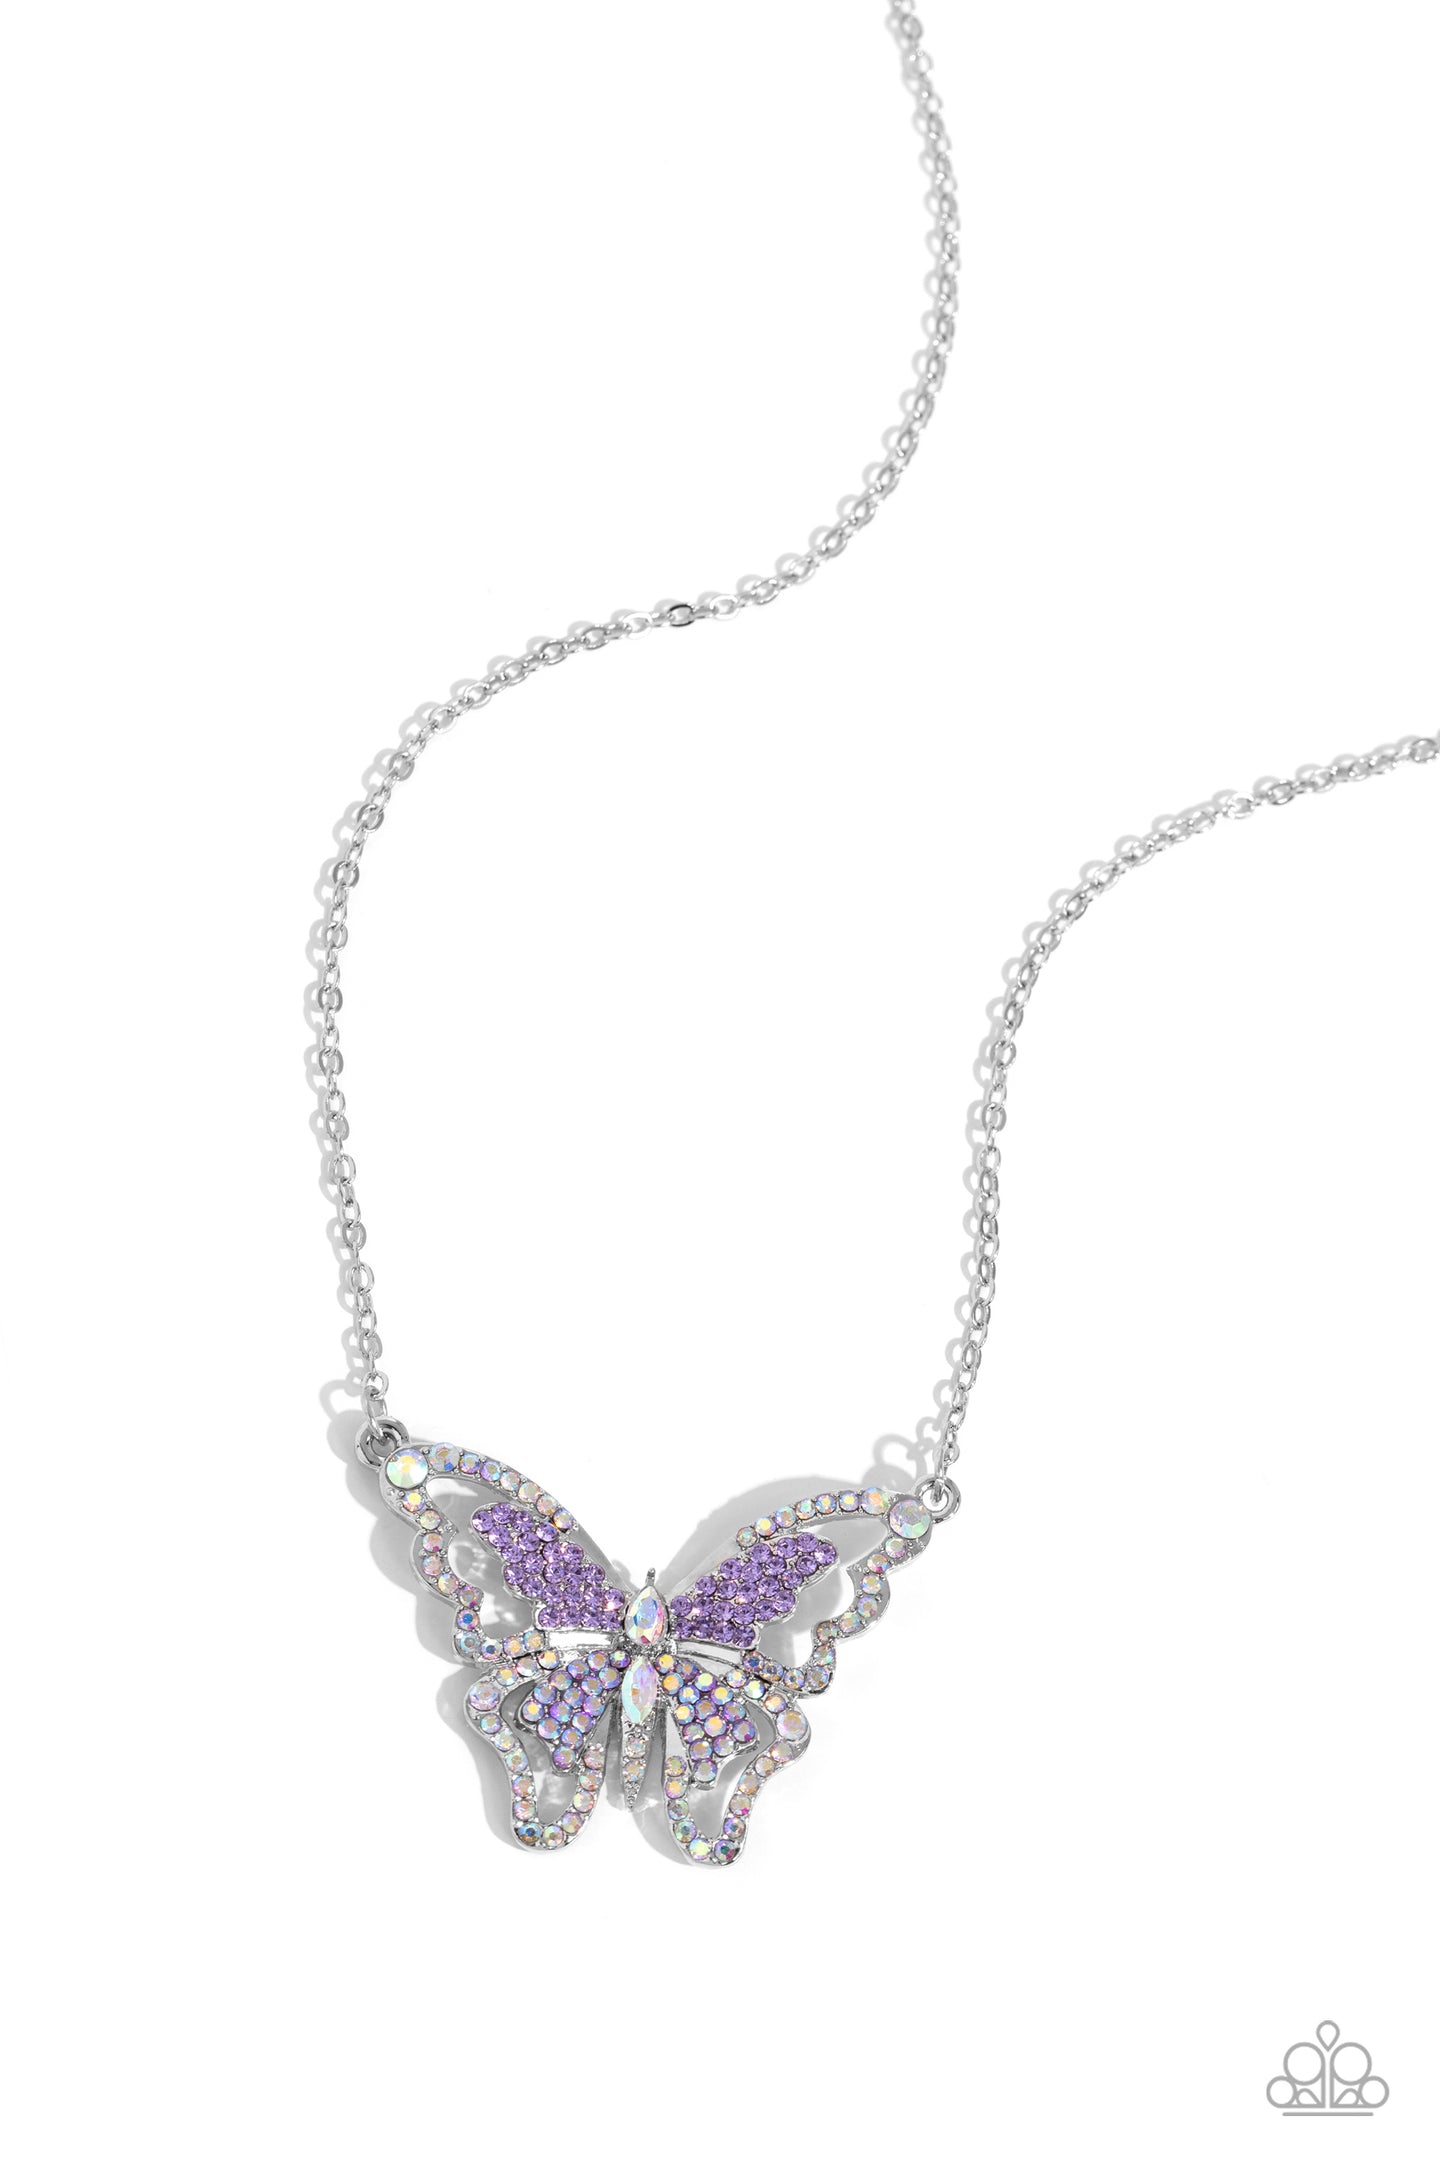 paparazzi-accessories-weekend-wings-purple-necklace